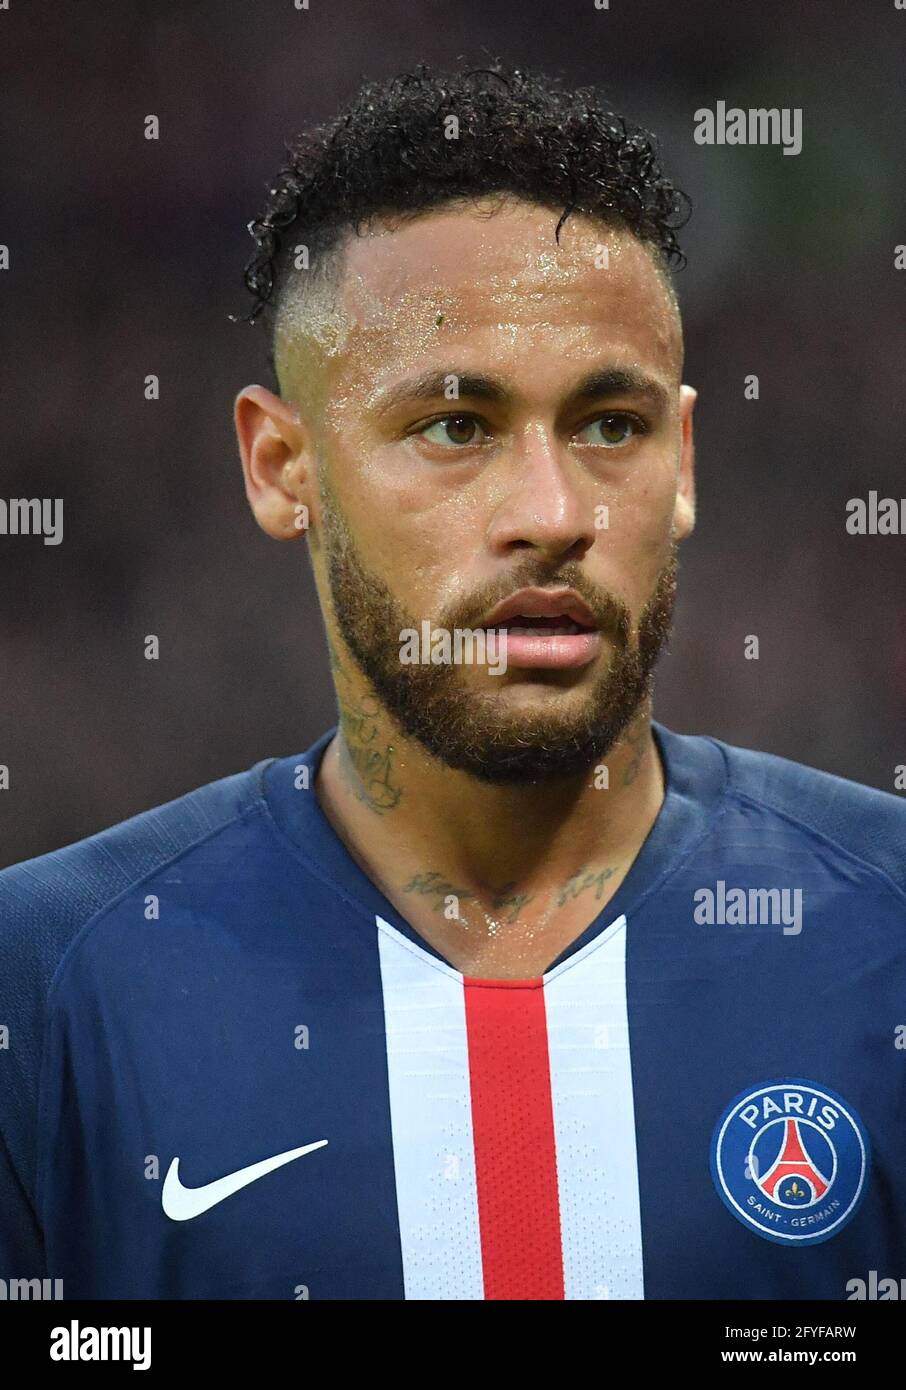 File photo dated October 5, 2019 of Paris Saint-Germain's Neymar during the  French L1 football match between Paris Saint-Germain and Angers SCO at the  Parc des Princes stadium in Paris. Nike said